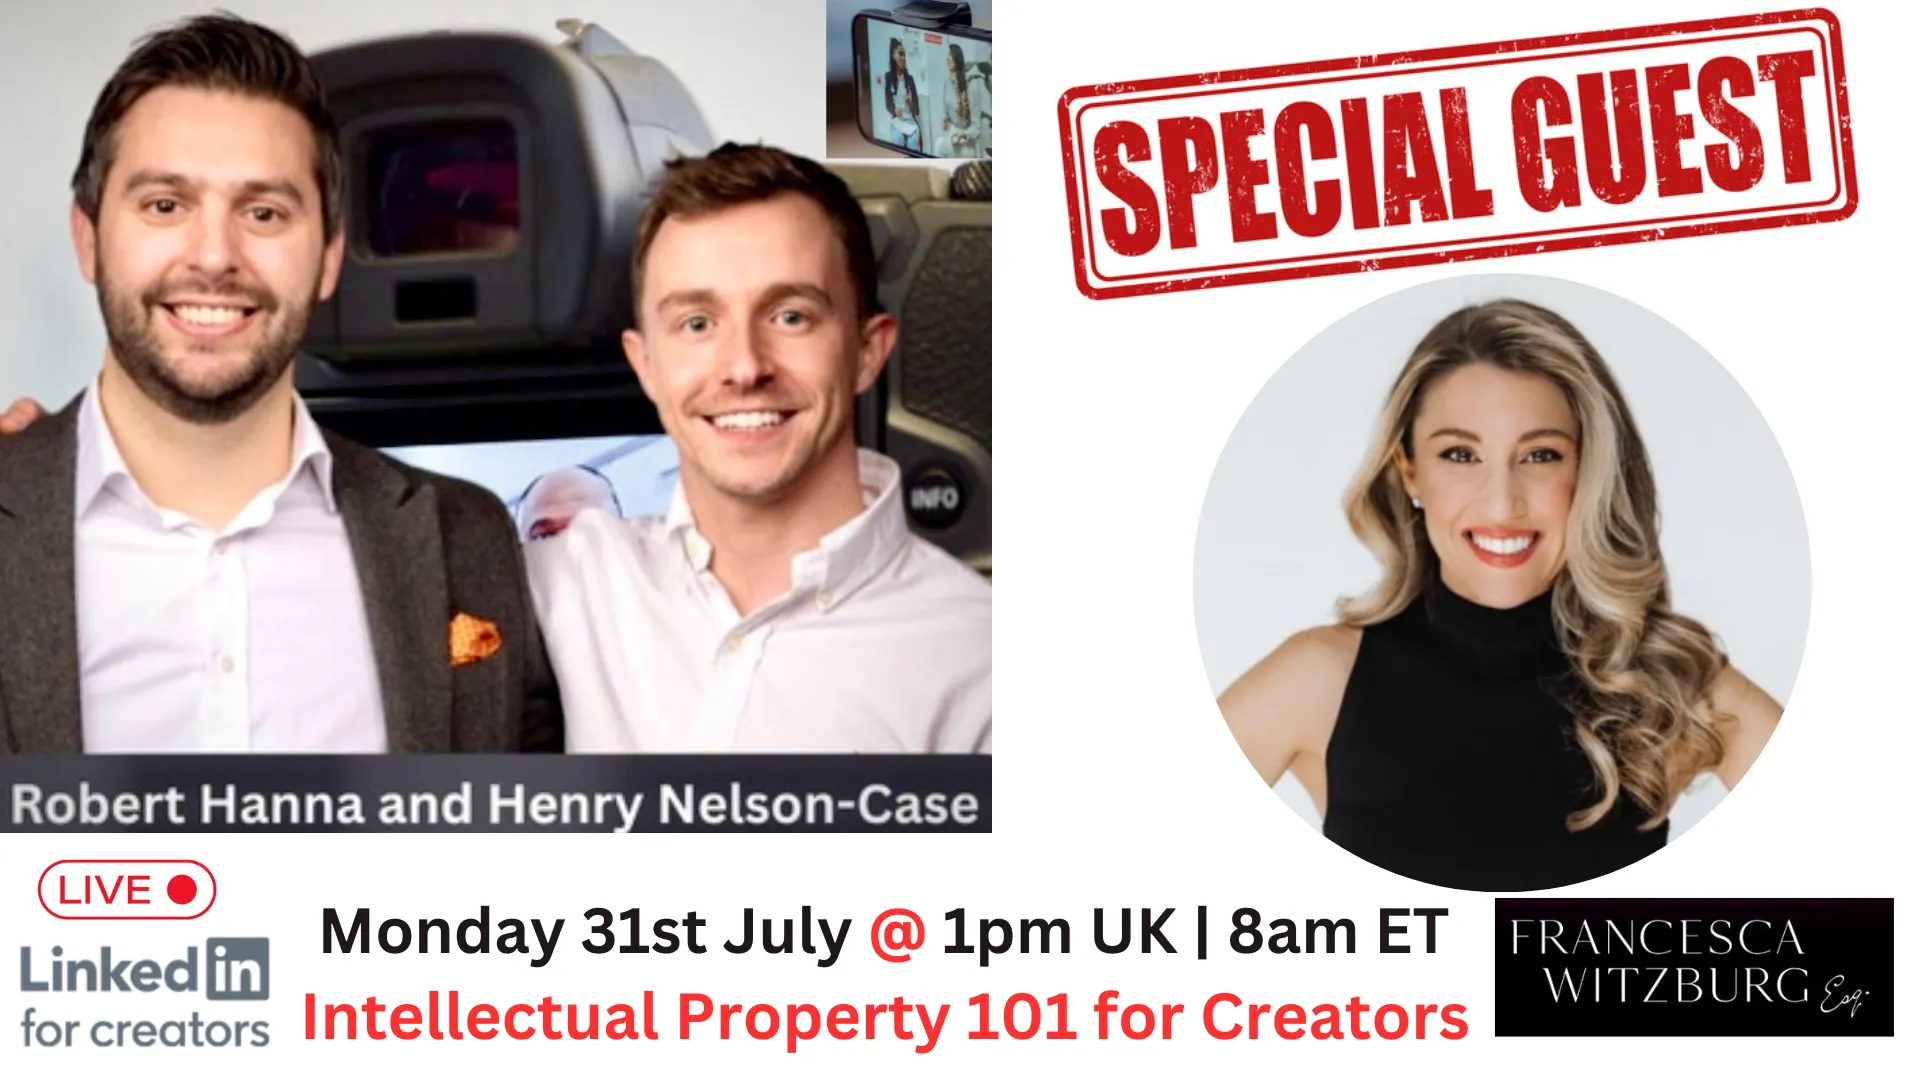 🚀 Ready to take your brand to the next level?

Join me and Henry Nelson-Case for an enlightening session as we welcome Global IP Counsel, <@Tvb9vGQEADVHLlpAnIKqVoVBjvZ2>. With a track record of safeguarding Brands with Trademarks, Copyrights & Contracts, she's a force to be reckoned with in the legal realm. 🌍⚖️
 
From working in the Manhattan office of the world's largest law firm, to stints at fashion heavyweights like Prada and Tory Burch, to advising a famous streetwear brand, Francesca boasts top-tier legal experience. She offers comprehensive expertise in protecting and monetising intellectual property with innovative strategies, including leveraging social media and emerging tech. 🚀

In this session, Francesca will demystify the world of Intellectual Property for creators, providing insights from her deep experience. From understanding the basics of IP to leveraging it to enhance your brand, you'll leave with actionable knowledge that could transform your creative journey! 🎨🔐

Among the many thought-provoking topics, we'll explore:

✅ The proactive steps creators should take to protect their intellectual property

✅ Methods creators can employ to leverage their IP to bolster their brand and income

✅ The crucial role a lawyer plays in managing and safeguarding a creator's IP

And so much more!

Don't miss this opportunity to learn from a leading industry expert. 

Register now by joining here: https://discord.gg/Q5fYjNpxkE

We can't wait to see you at the Legally Speaking Club's 'Intellectual Property 101 for Creators' session, a significant chapter in our ongoing Legal Creator Economy Explained Series. 🎉📚

Let's dive into the world of IP together and give your creativity the legal protection it deserves. 🛡️🎨 

See you there!

#IPforCreators #Lawyers #CreatorEconomy #BrandProtection #IntellectualProperty

---
🌟🌍 My mission? To foster a kind, collaborative, and vibrant legal community, propelling us forward into a successful legal creator economy. Let's shape the future, together. 